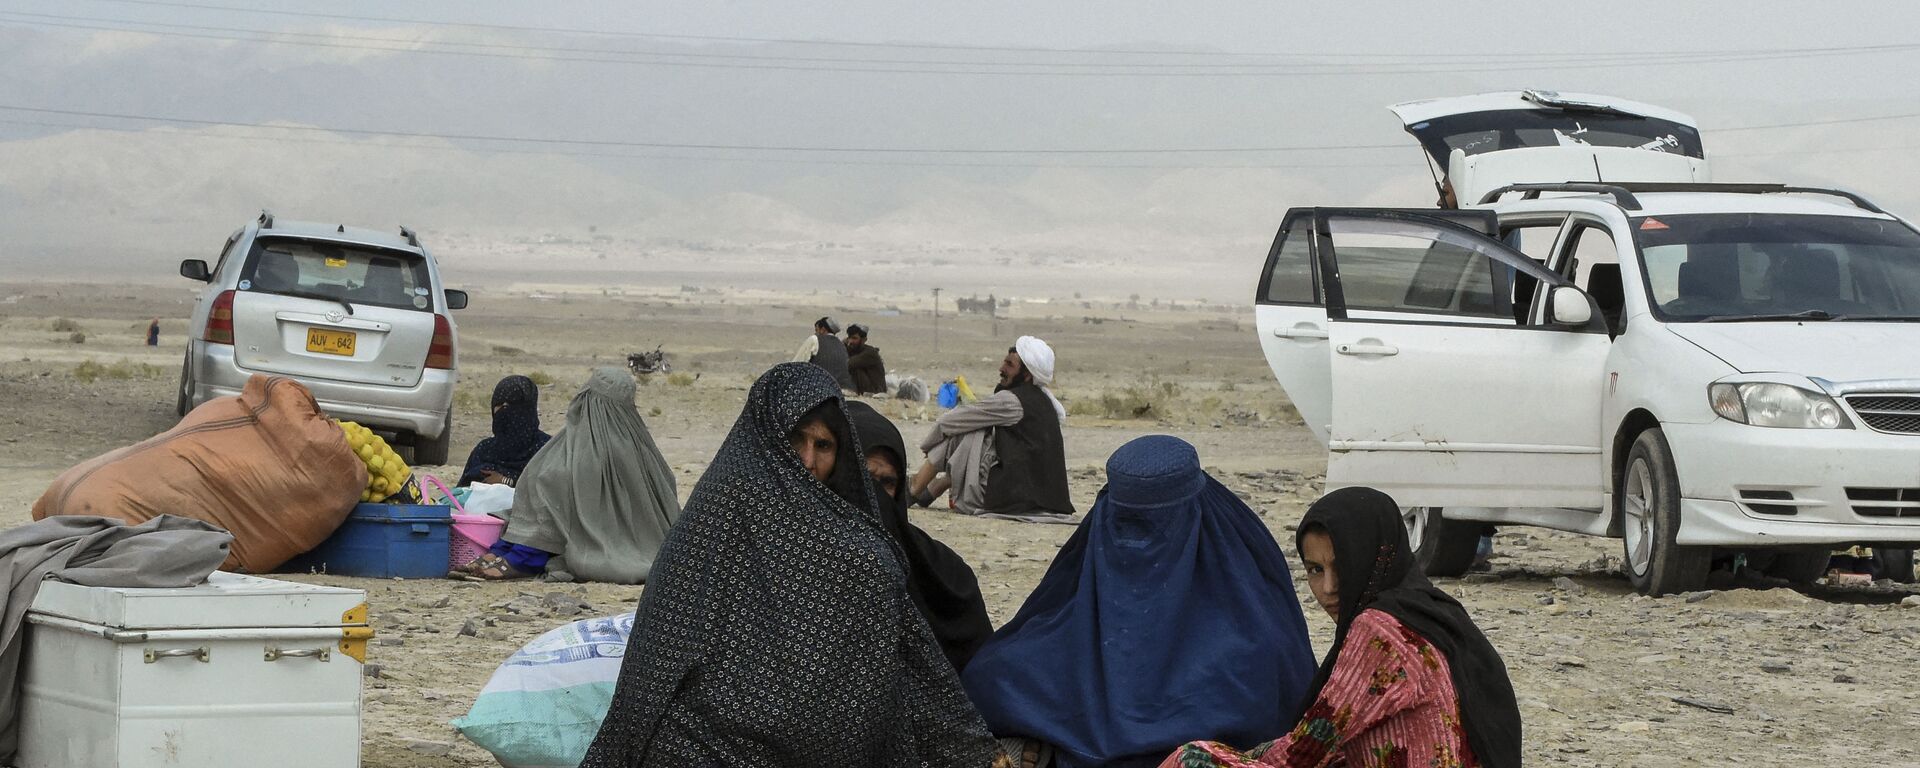 Stranded people wait for the reopening of border crossing point in Pakistan's border town of Chaman on July 16, 2021, following clashes between Afghan forces and Taliban fighters in Spin Boldak to retake the key border crossing with Pakistan. - Sputnik International, 1920, 19.07.2021